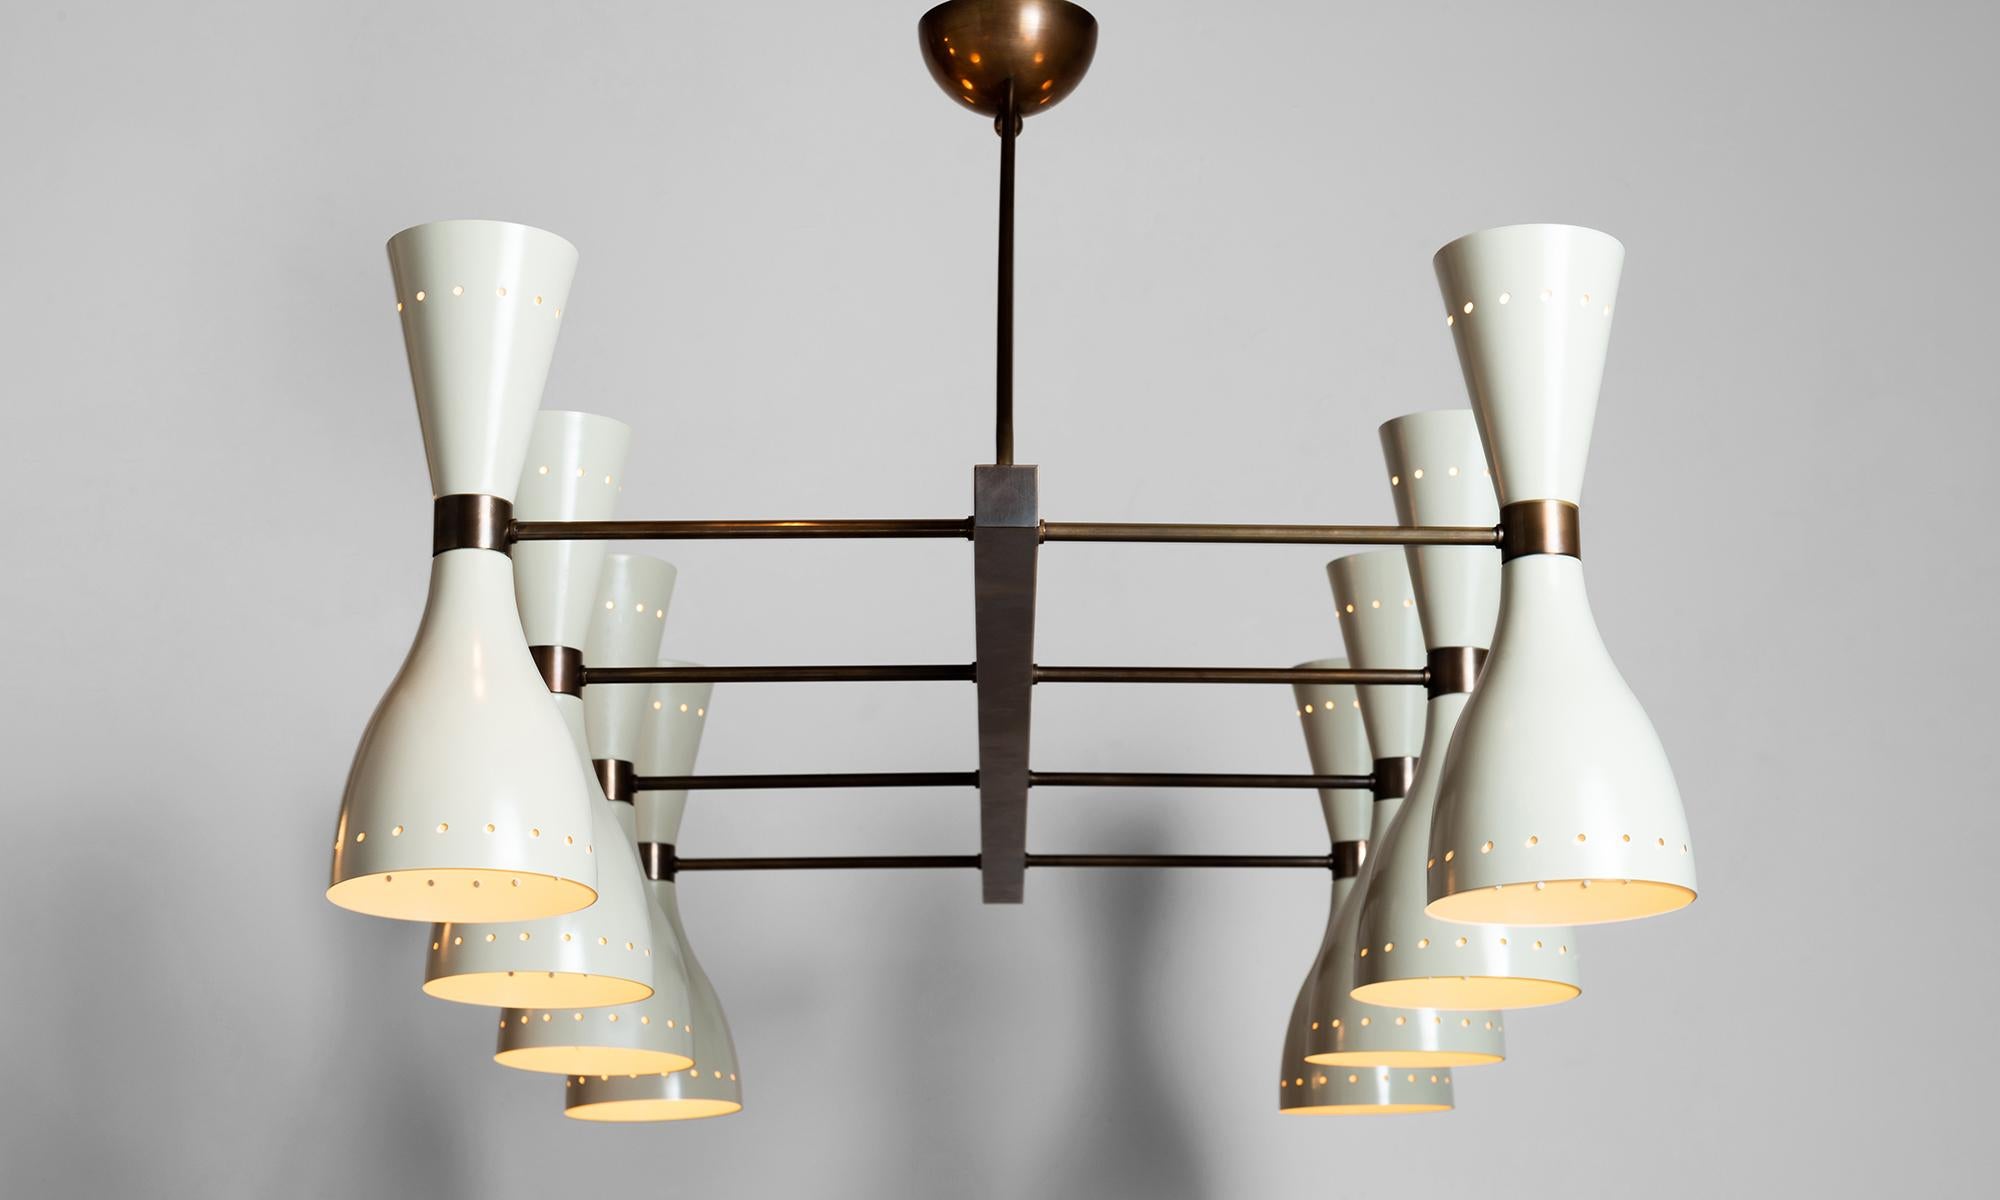 Cream & Brass Eight Shade Chandelier  
Made in Italy
Rectangular form with brass hardware and eight black painted metal shades.
55